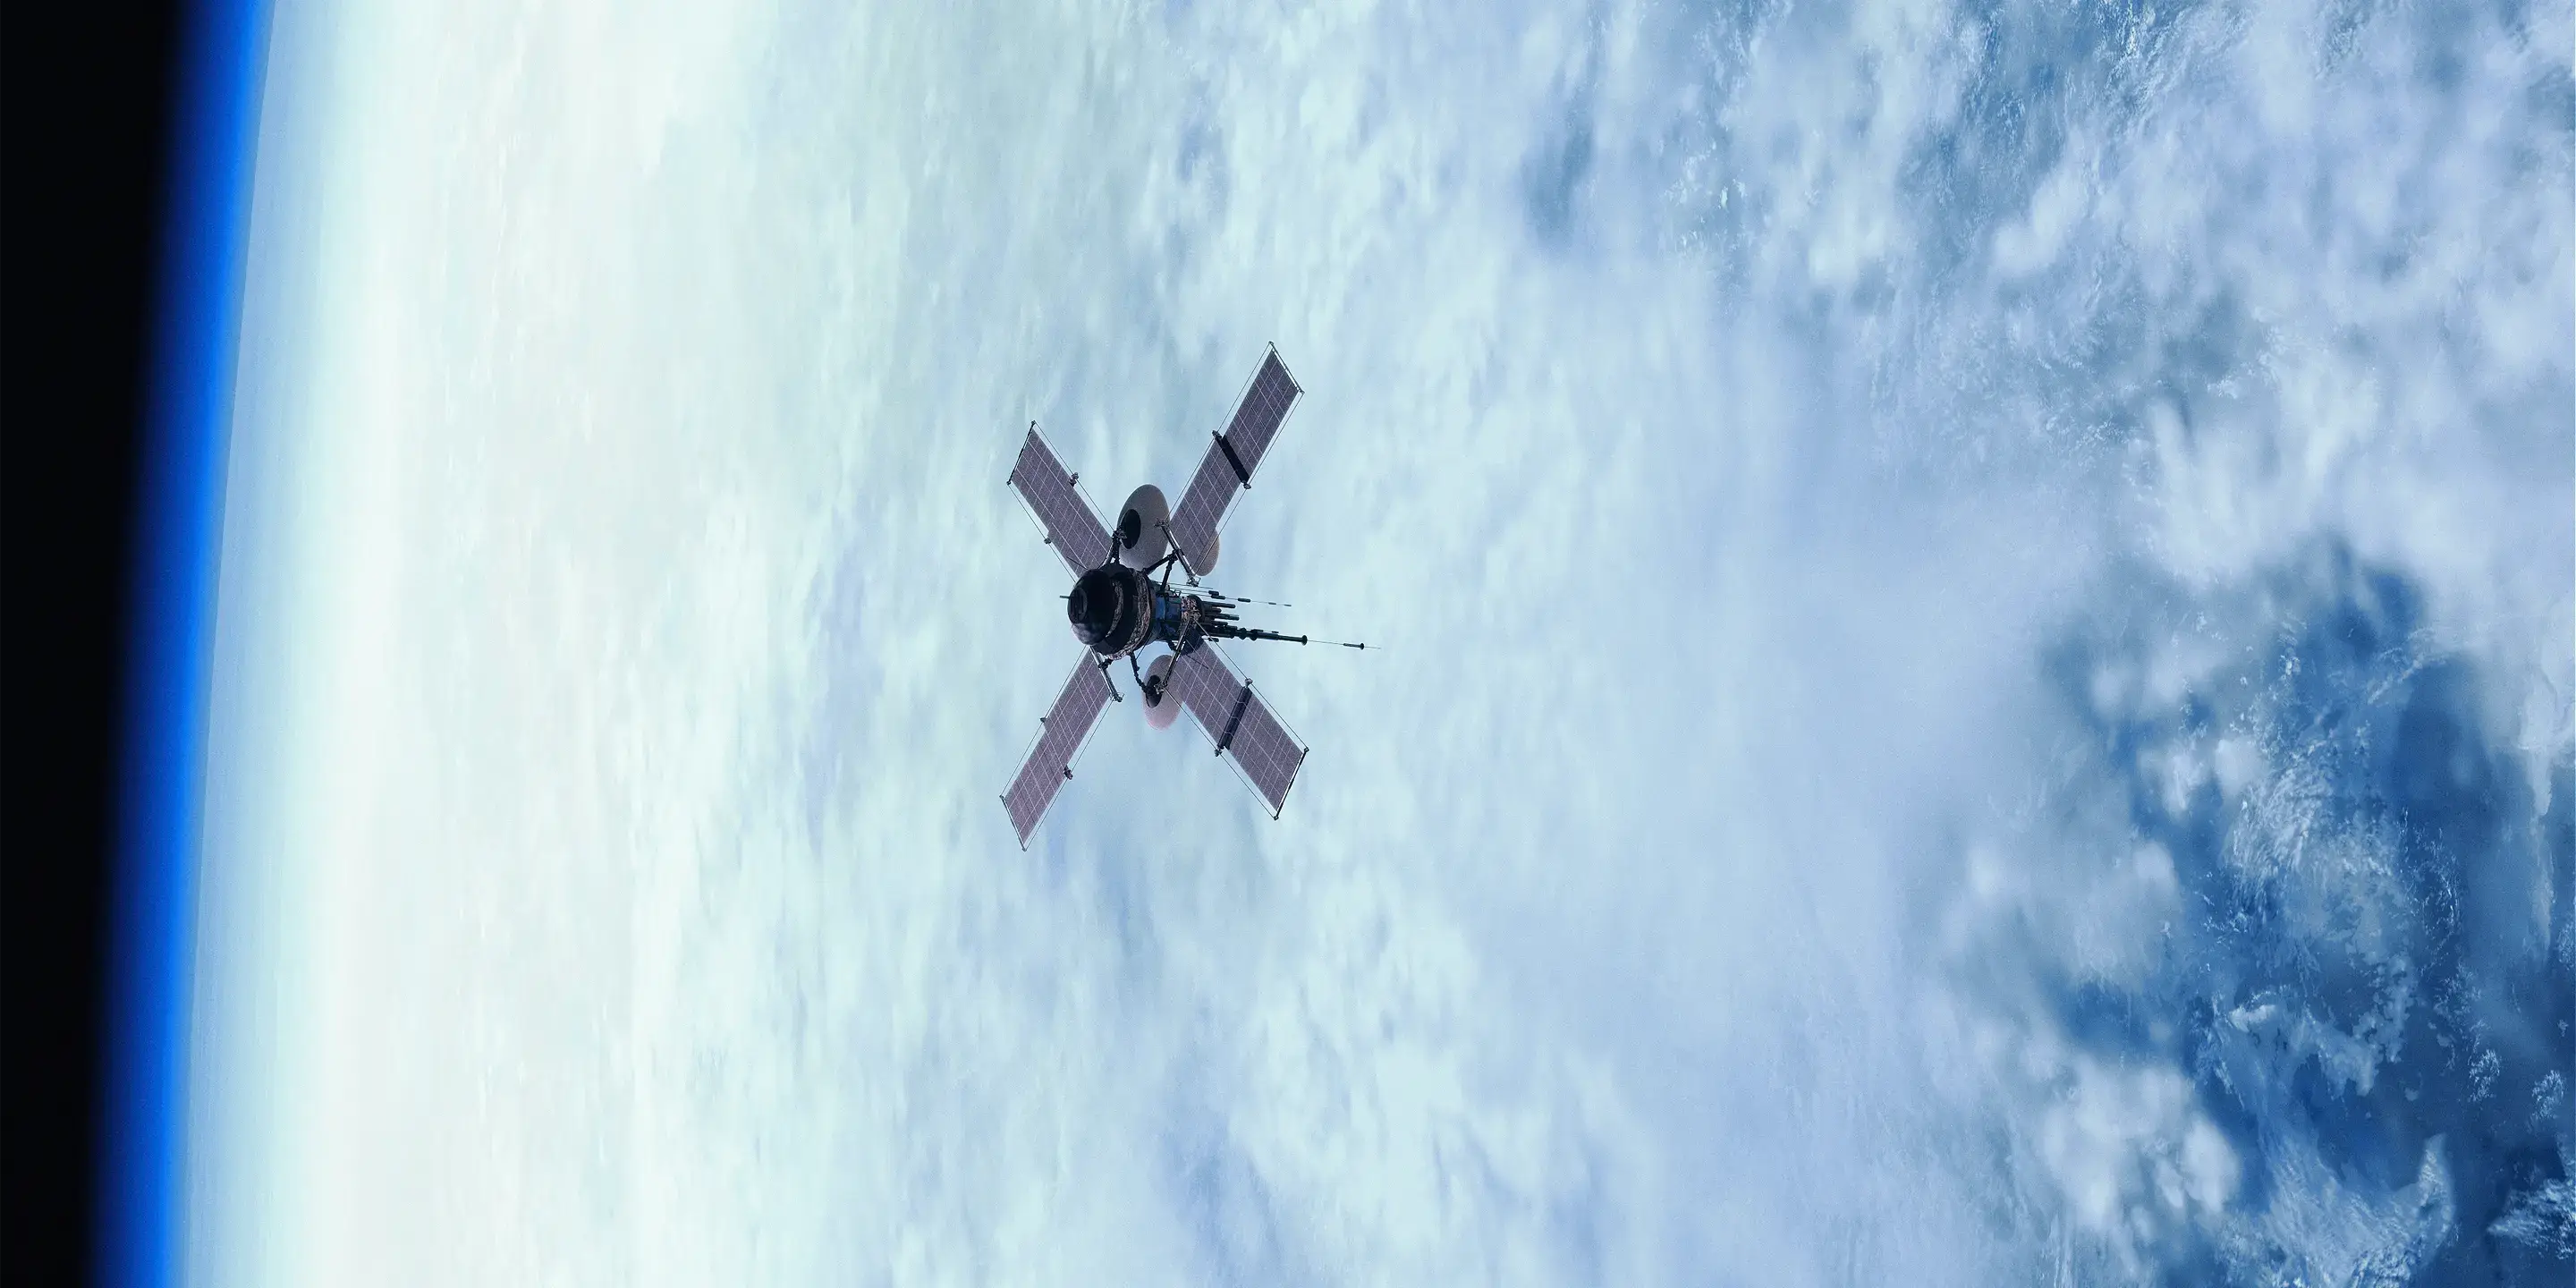 Satellite orbiting earth, with solar panels extended on either side, against a backdrop of clouds and the blue curve of the planet's atmosphere.